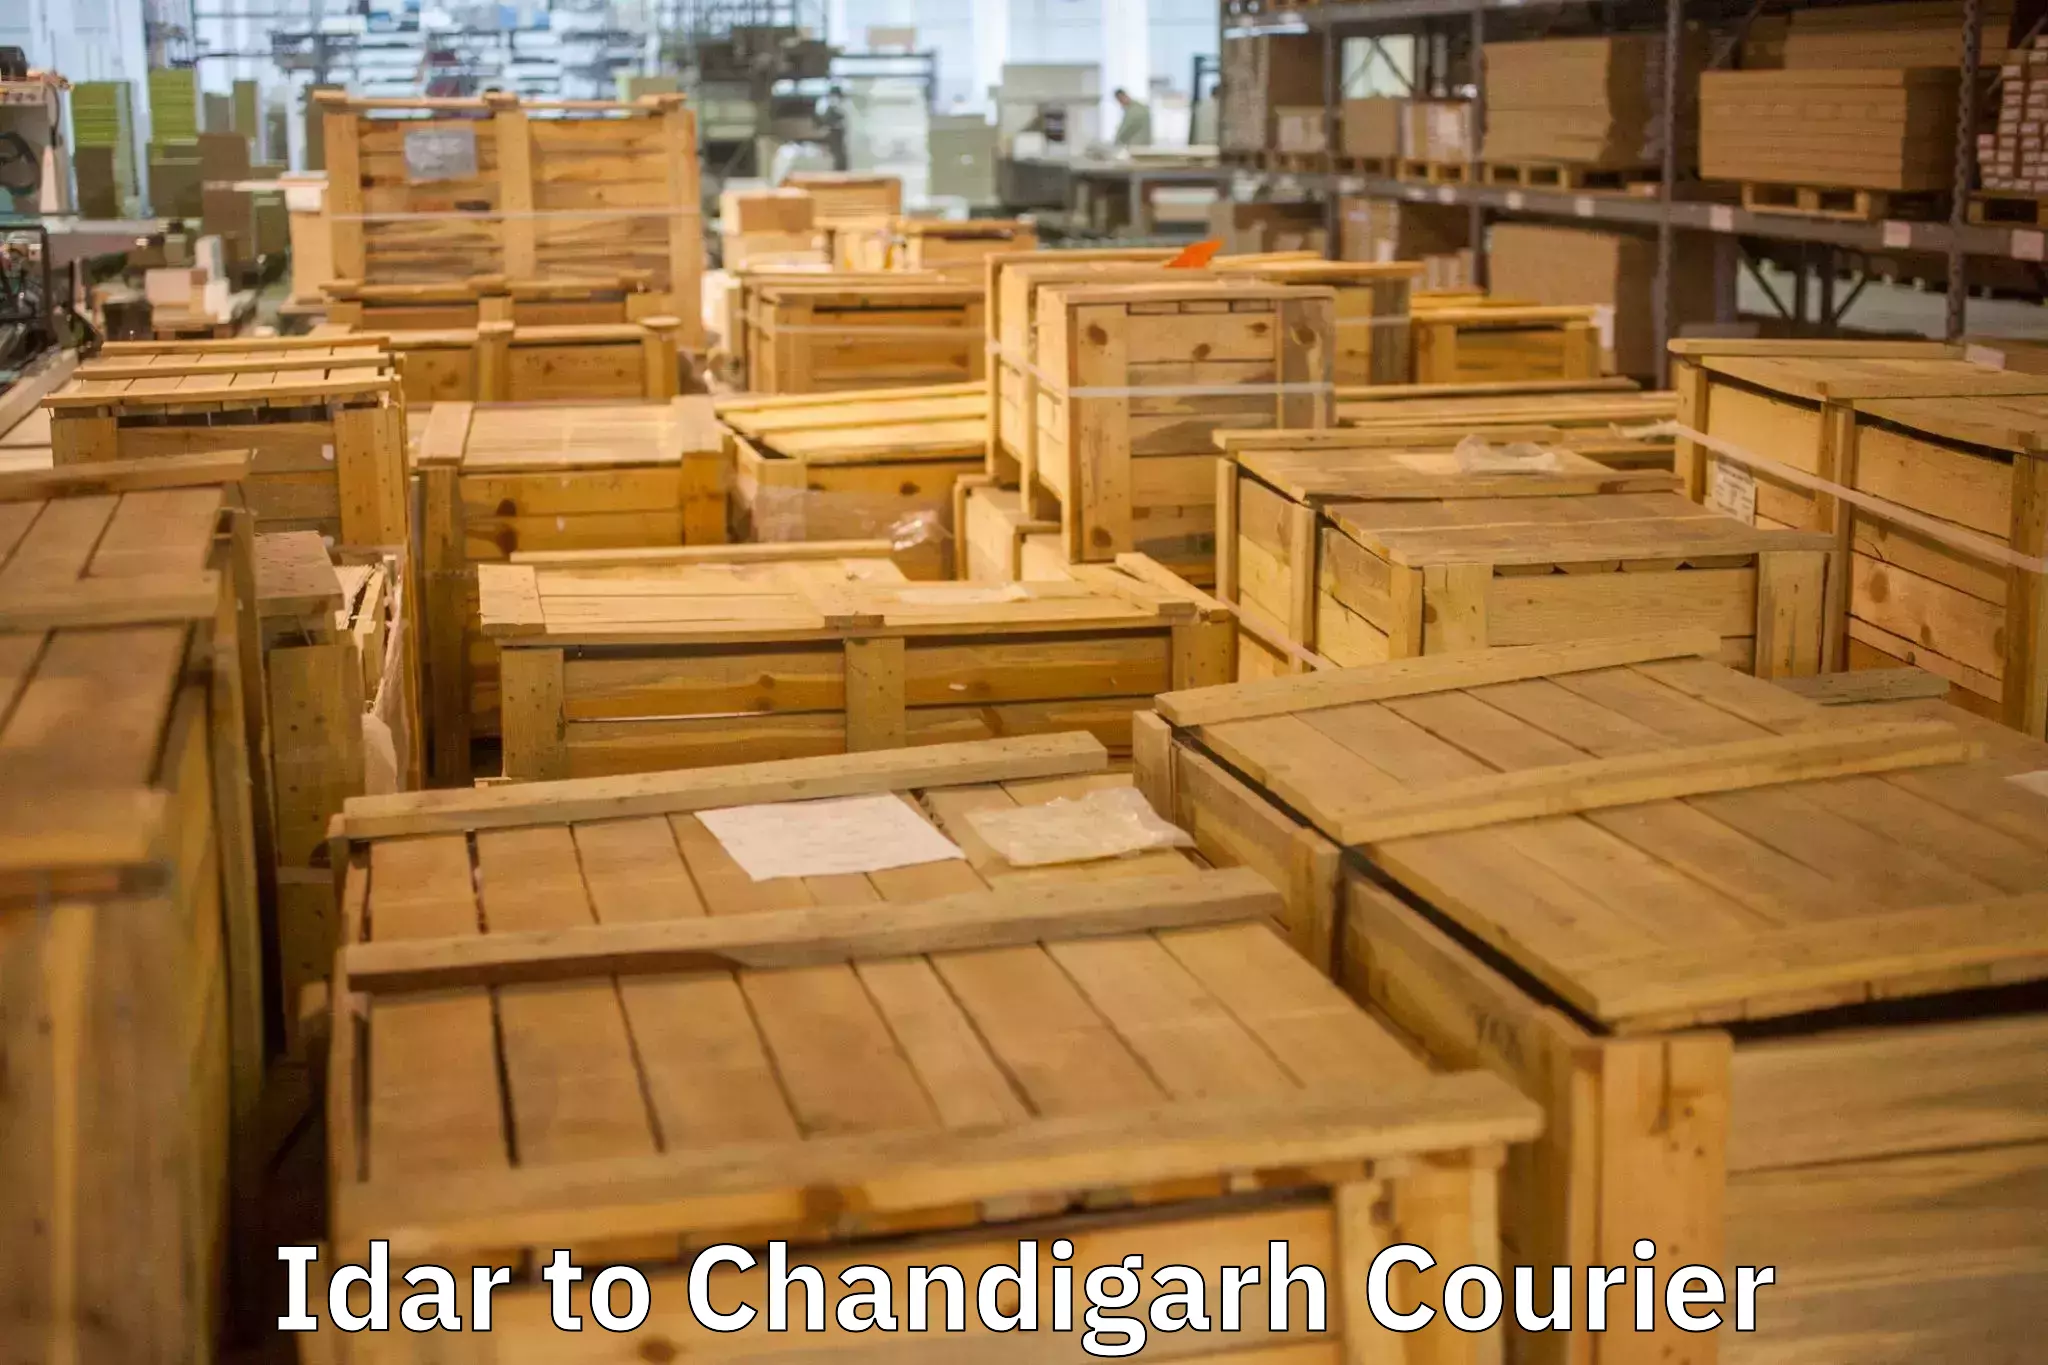 Furniture moving experts in Idar to Chandigarh